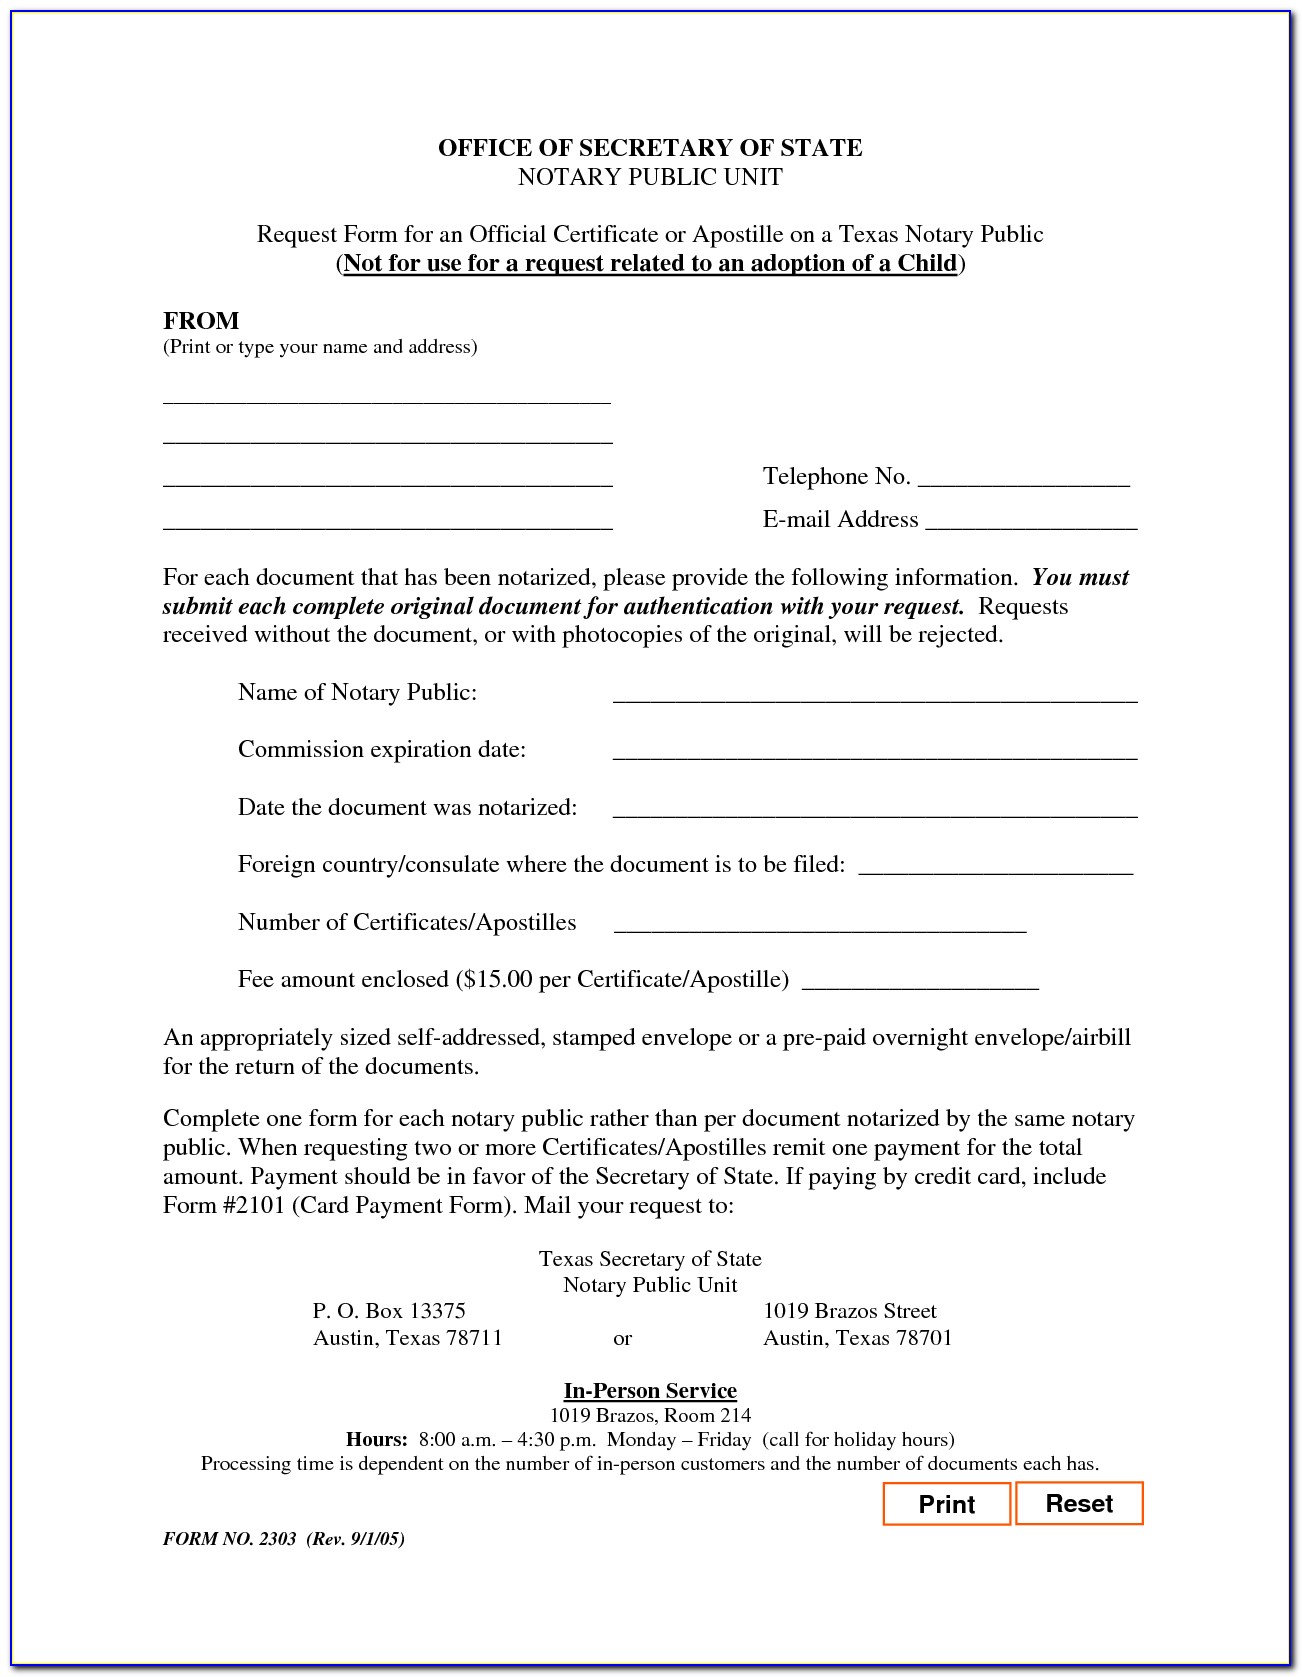 Sample Forms Notary Public